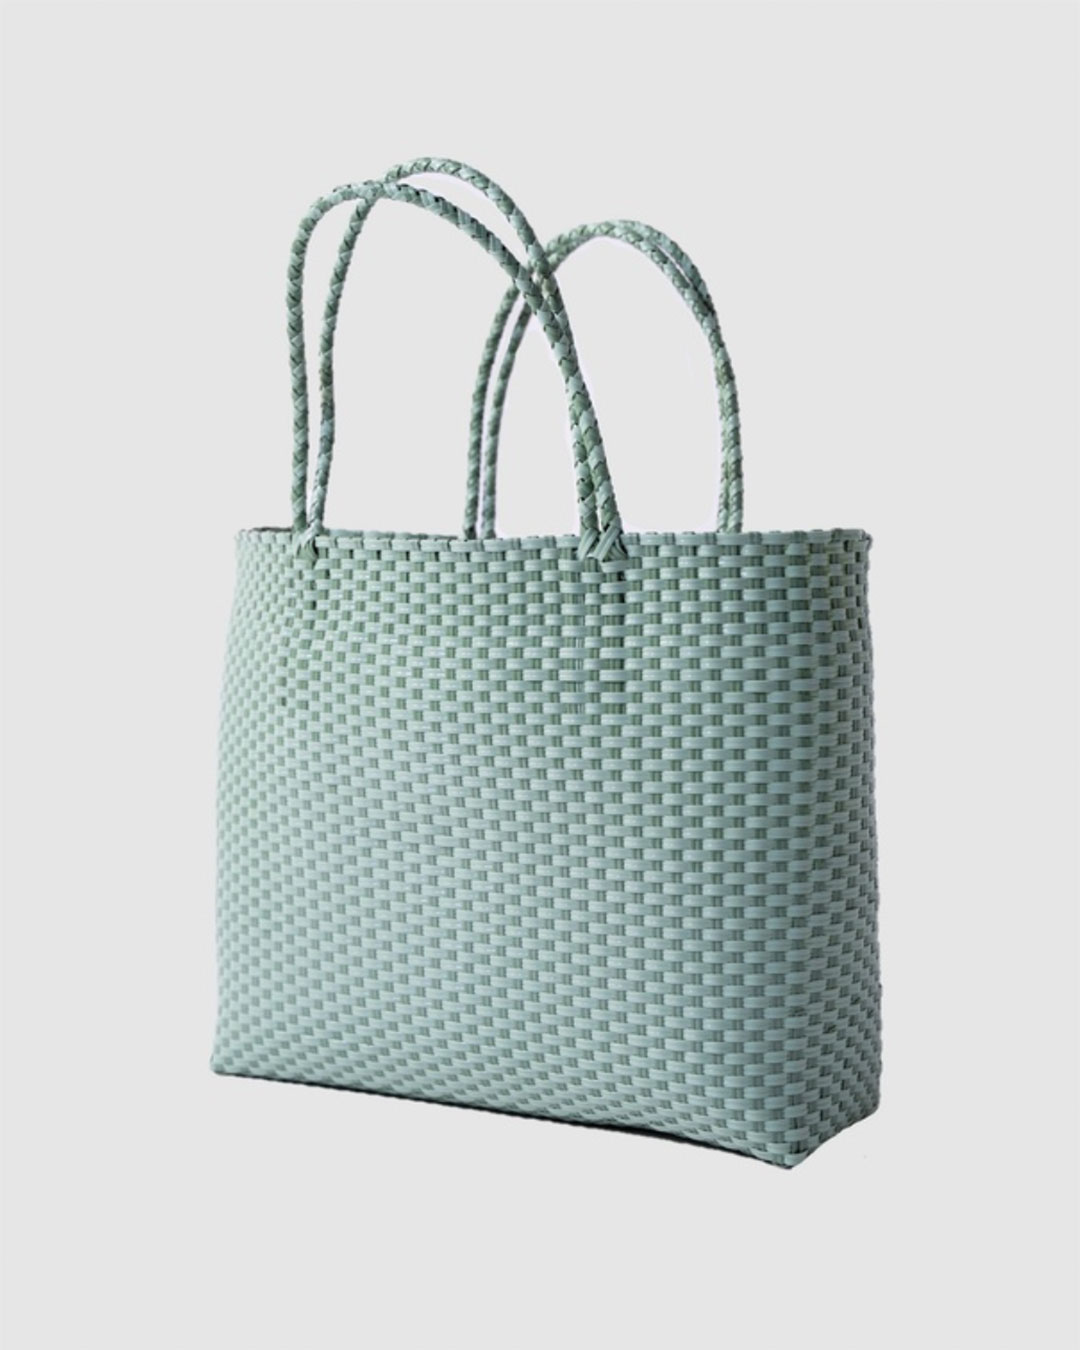 A light green tote bag woven from plastic material.